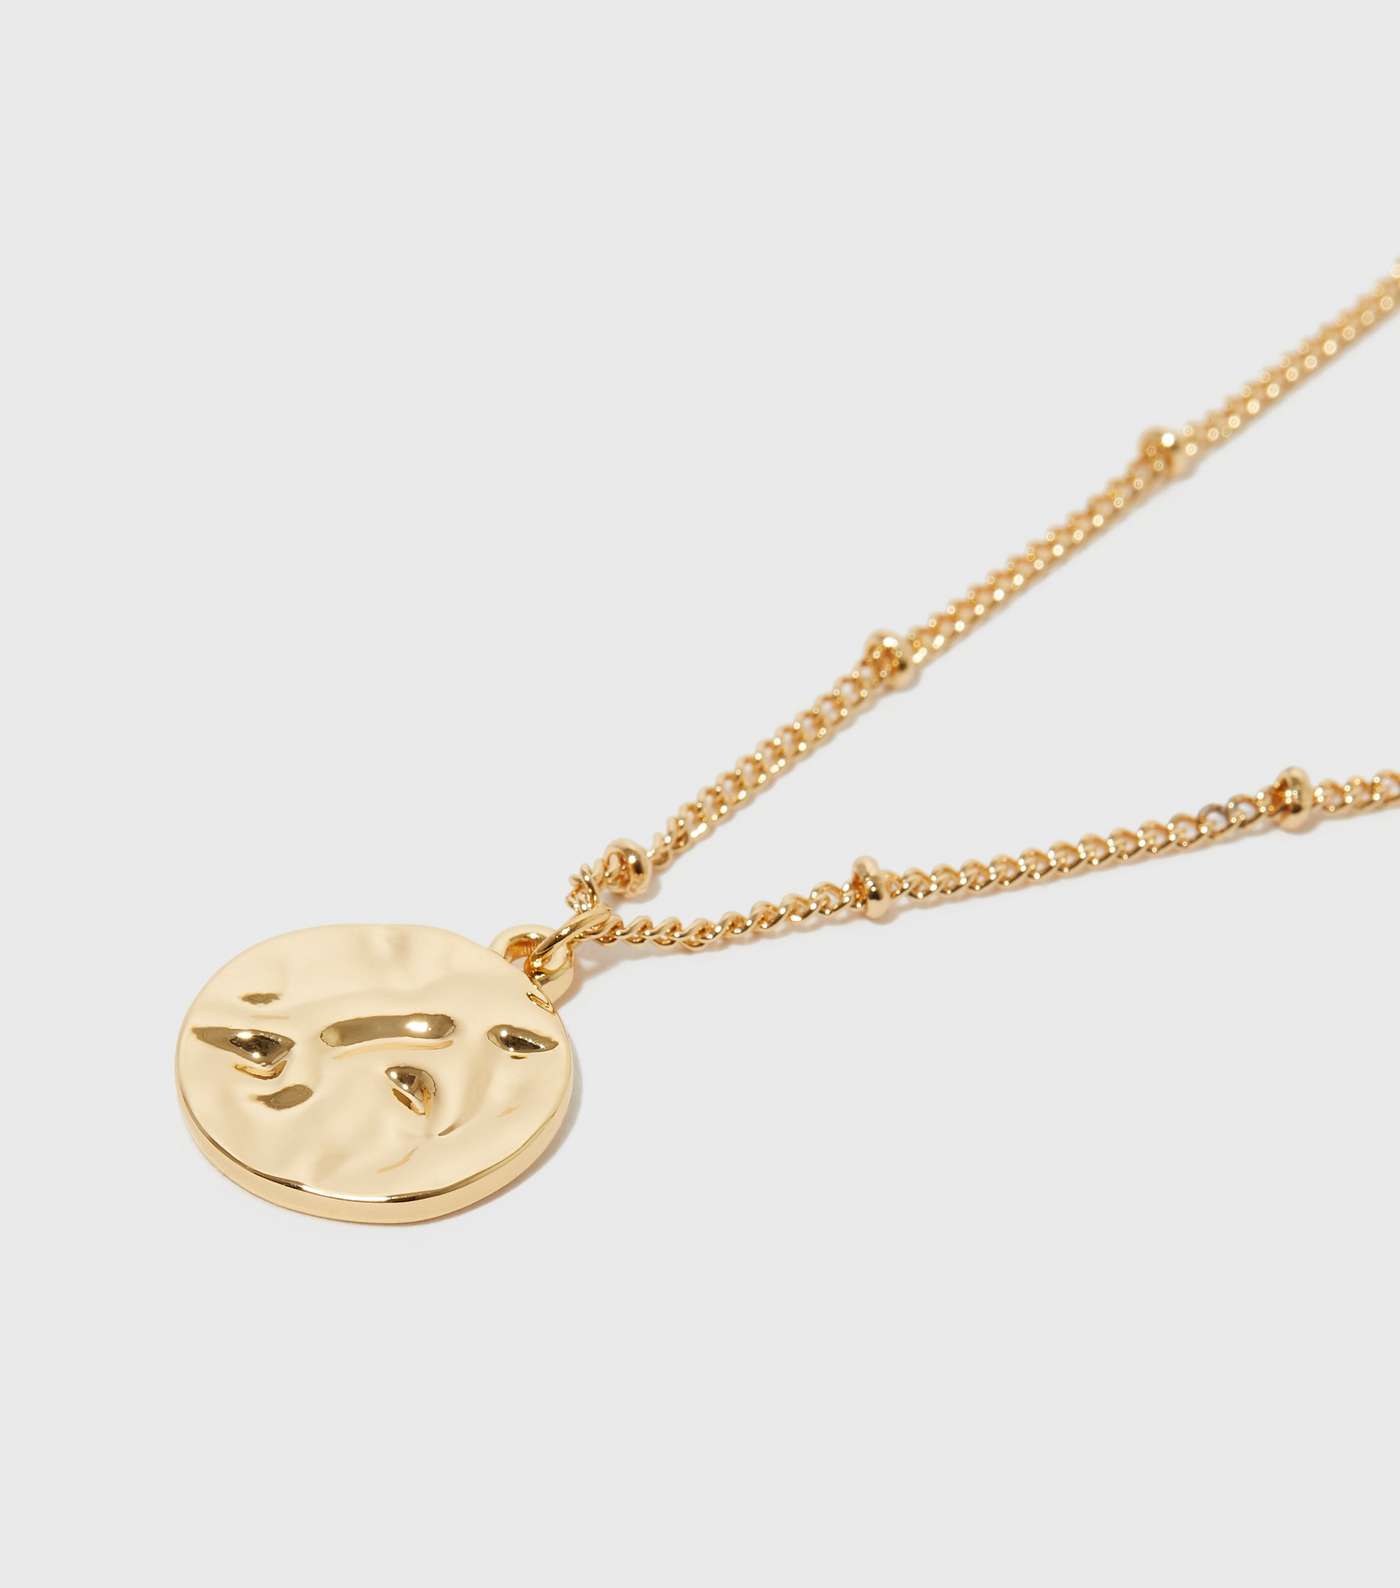 Real Gold Plated Beaten Disc Pendant Necklace Image 2